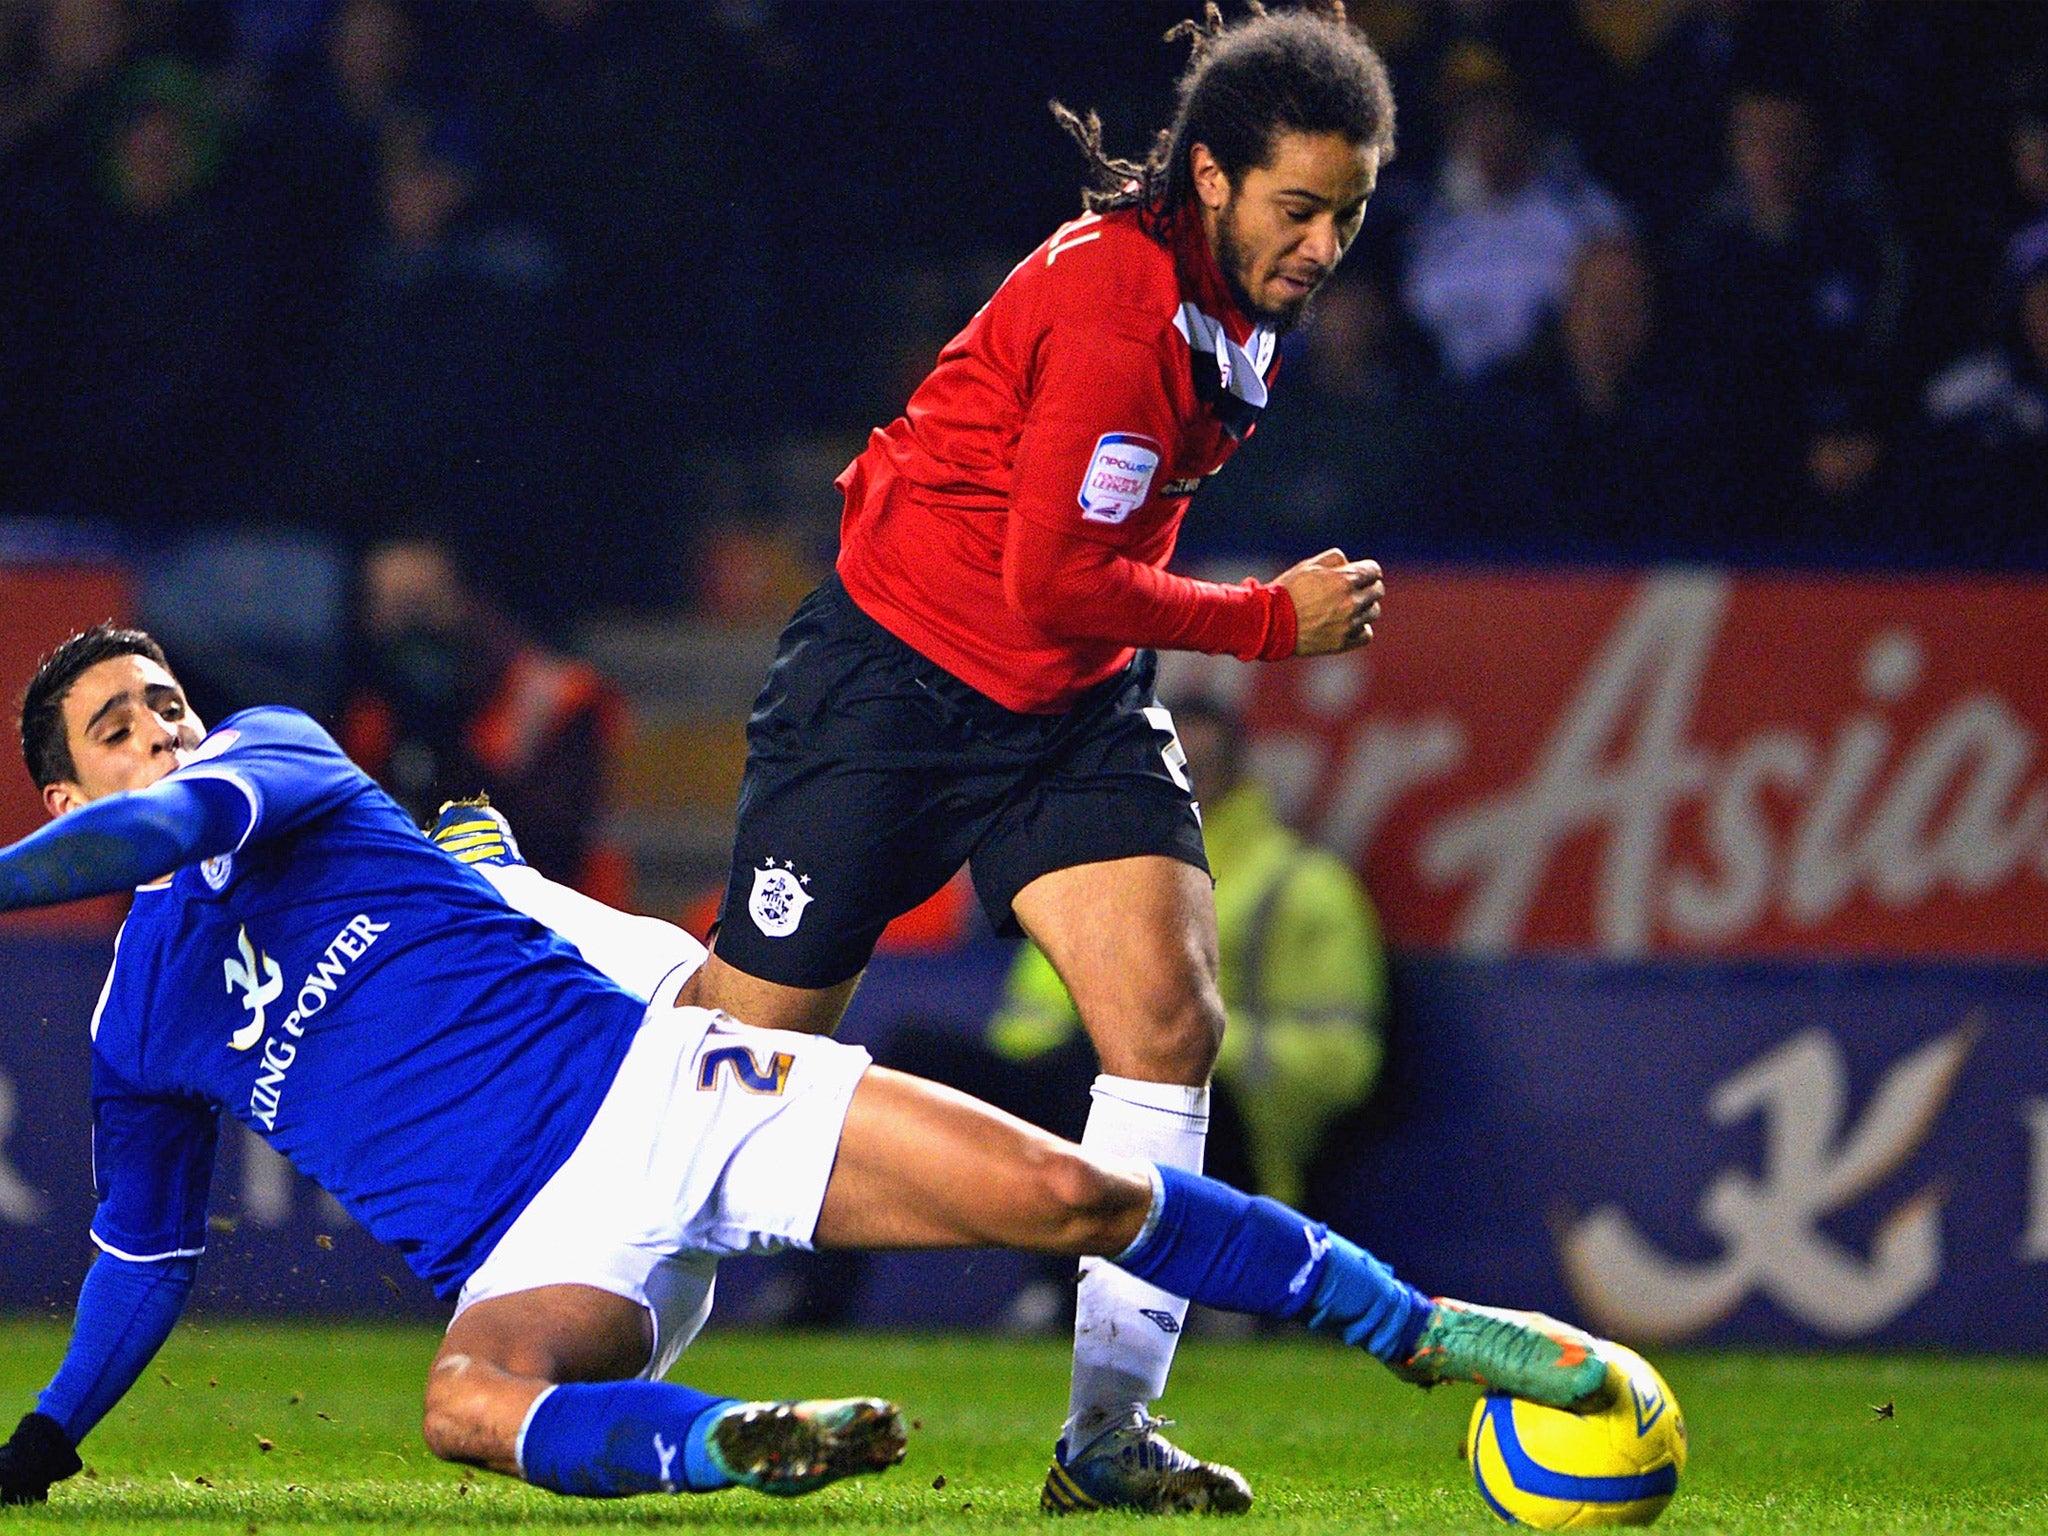 Huddersfield’s Sean Scannell rounds Anthony Knockaert of Leicester